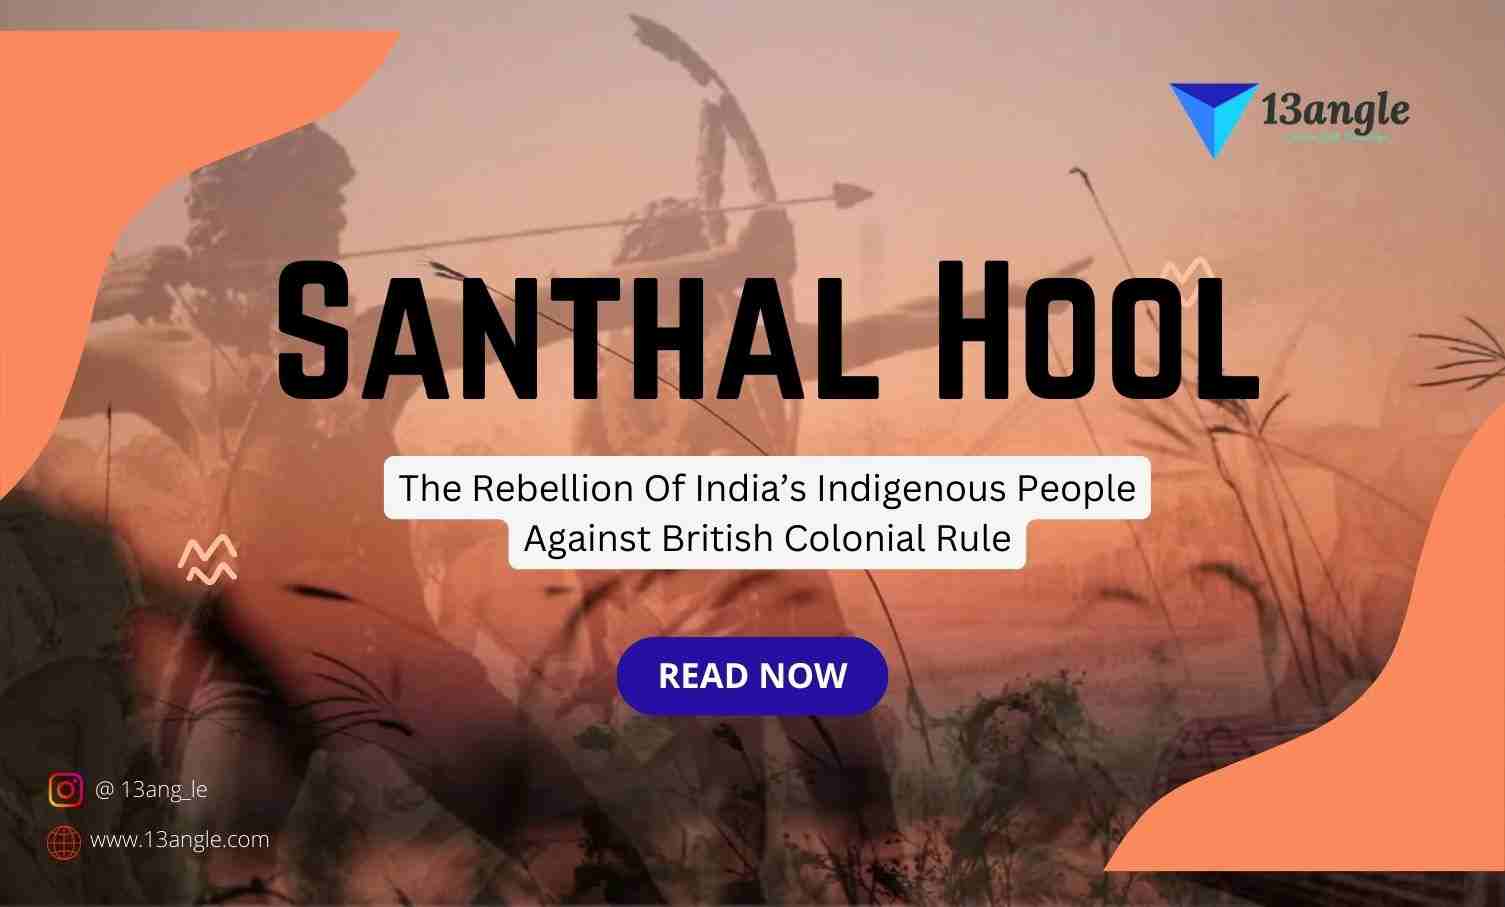 Santhal Hool The Rebellion Of India’s Indigenous People Against British Colonial Rule- The Bridge